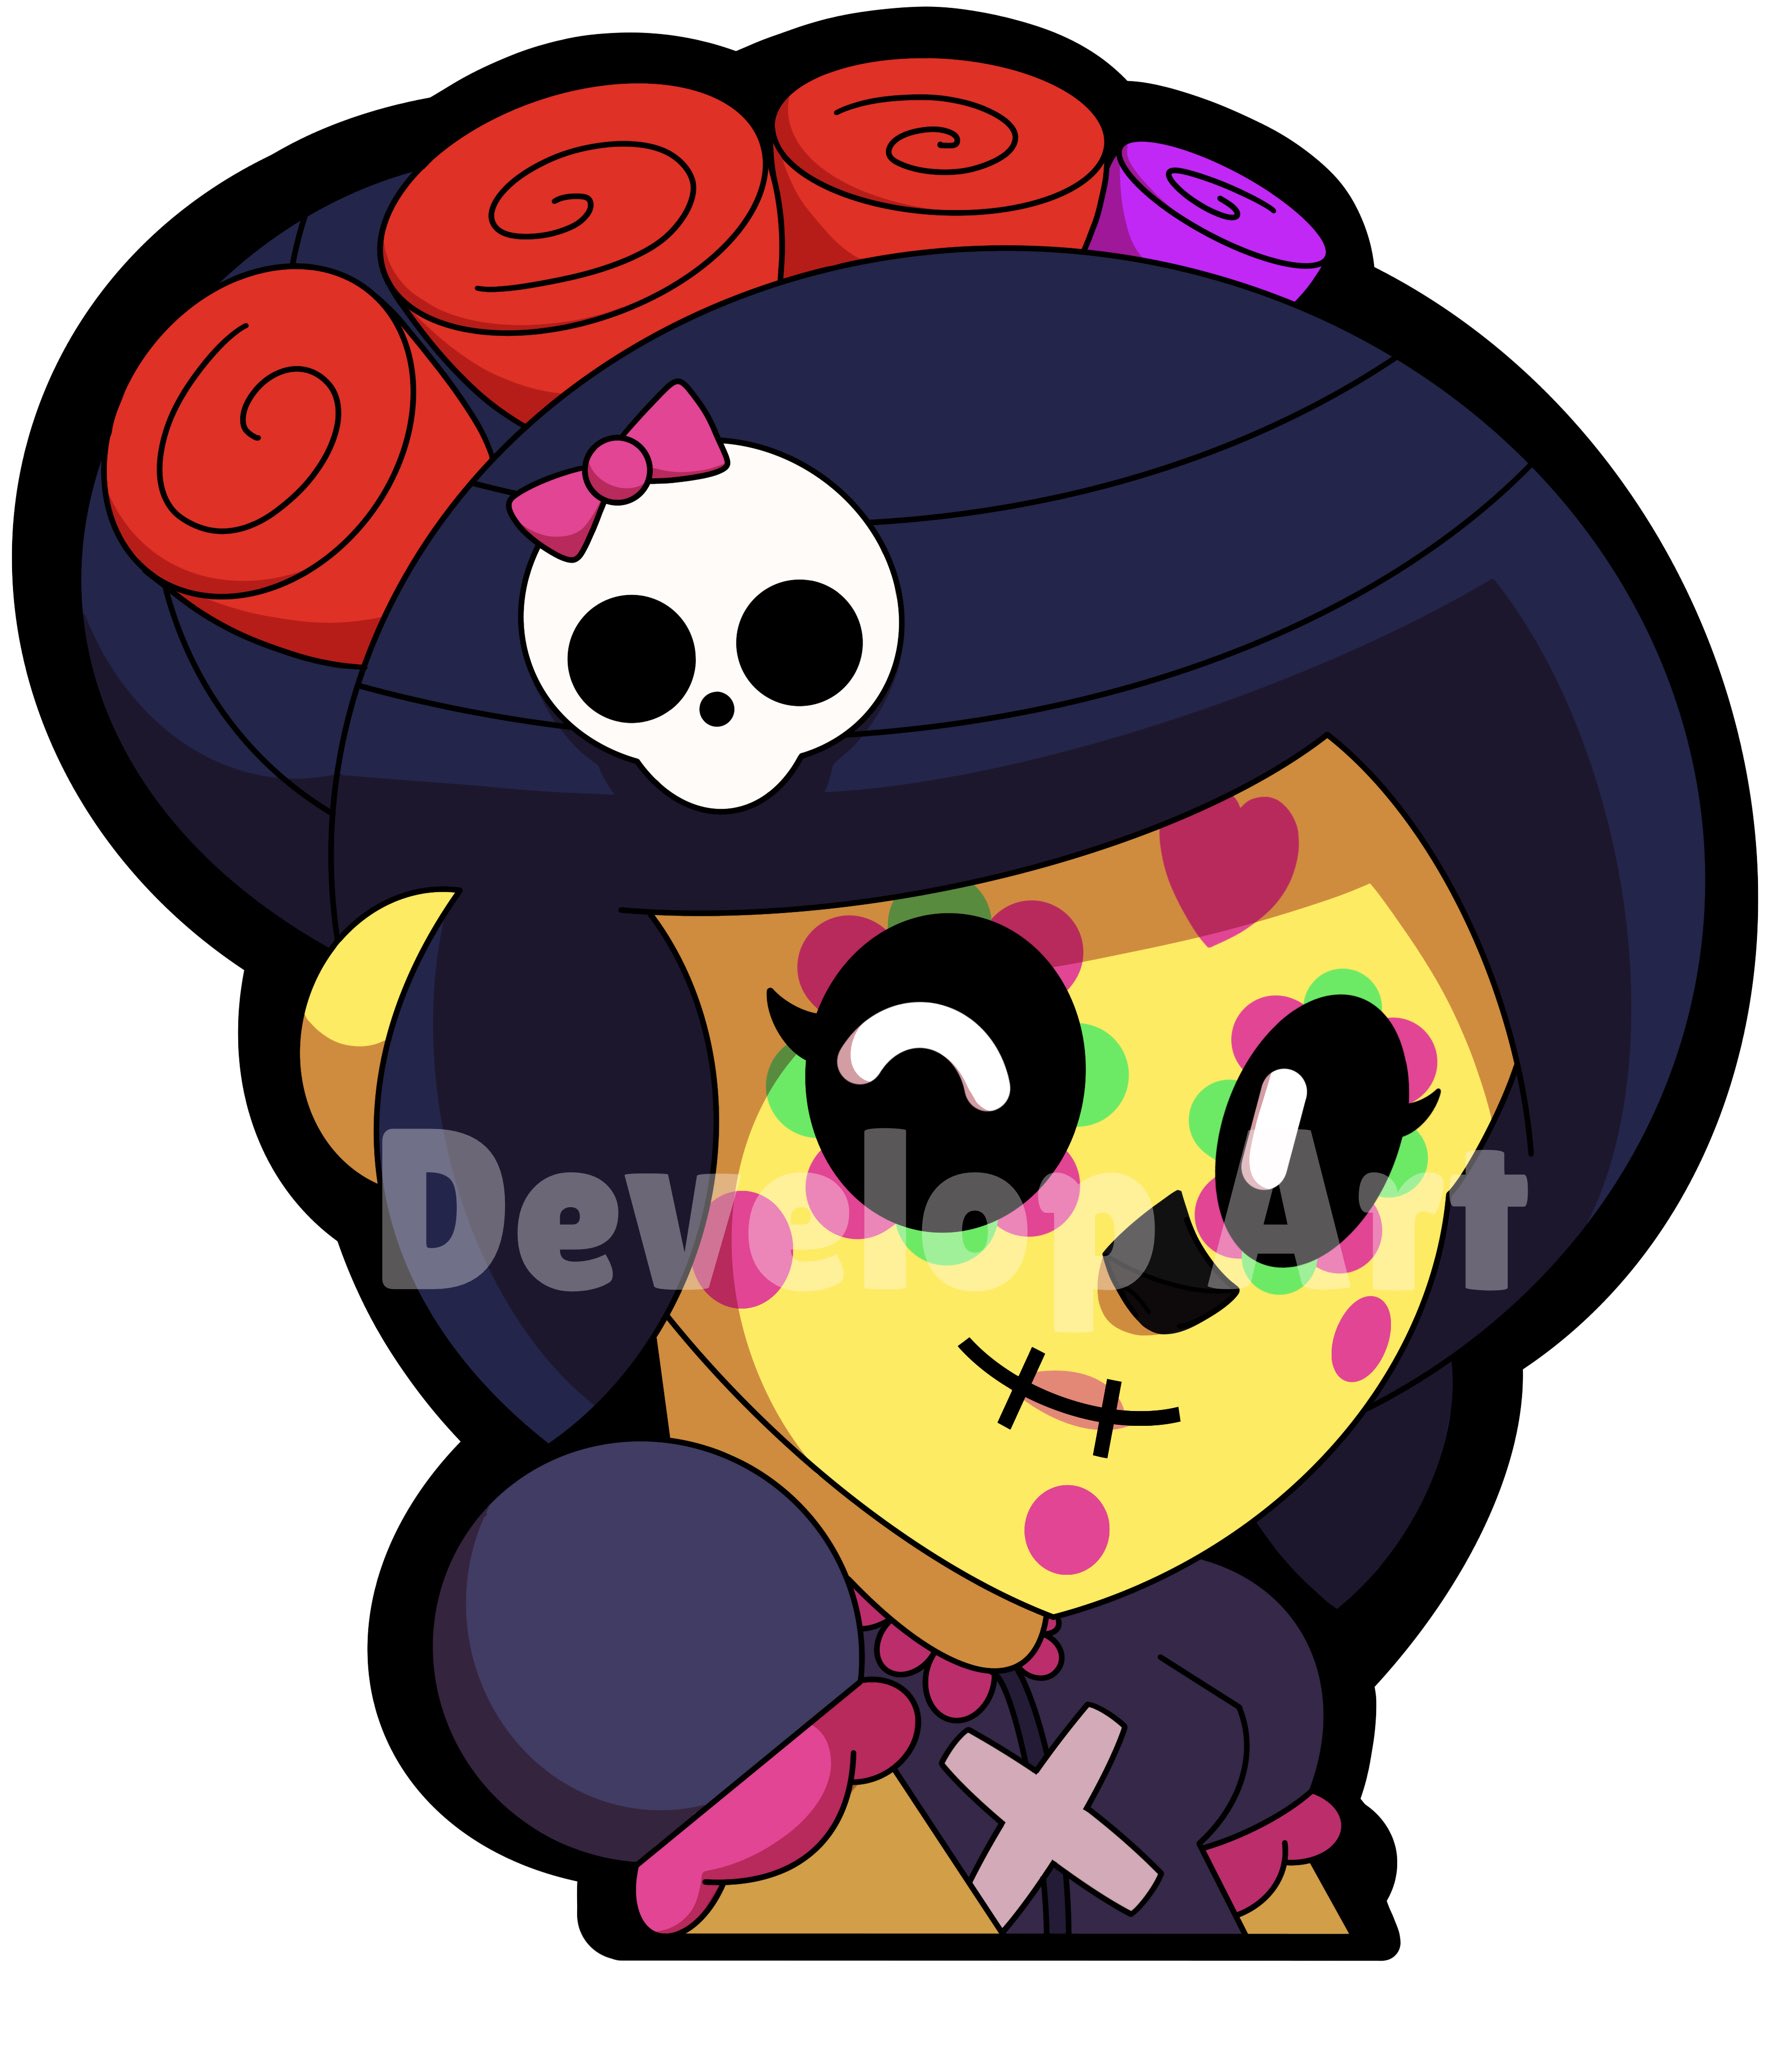 Dev On Twitter Calavera Piper Icon At 4 Am Because Why Not - piper brawl stars profile